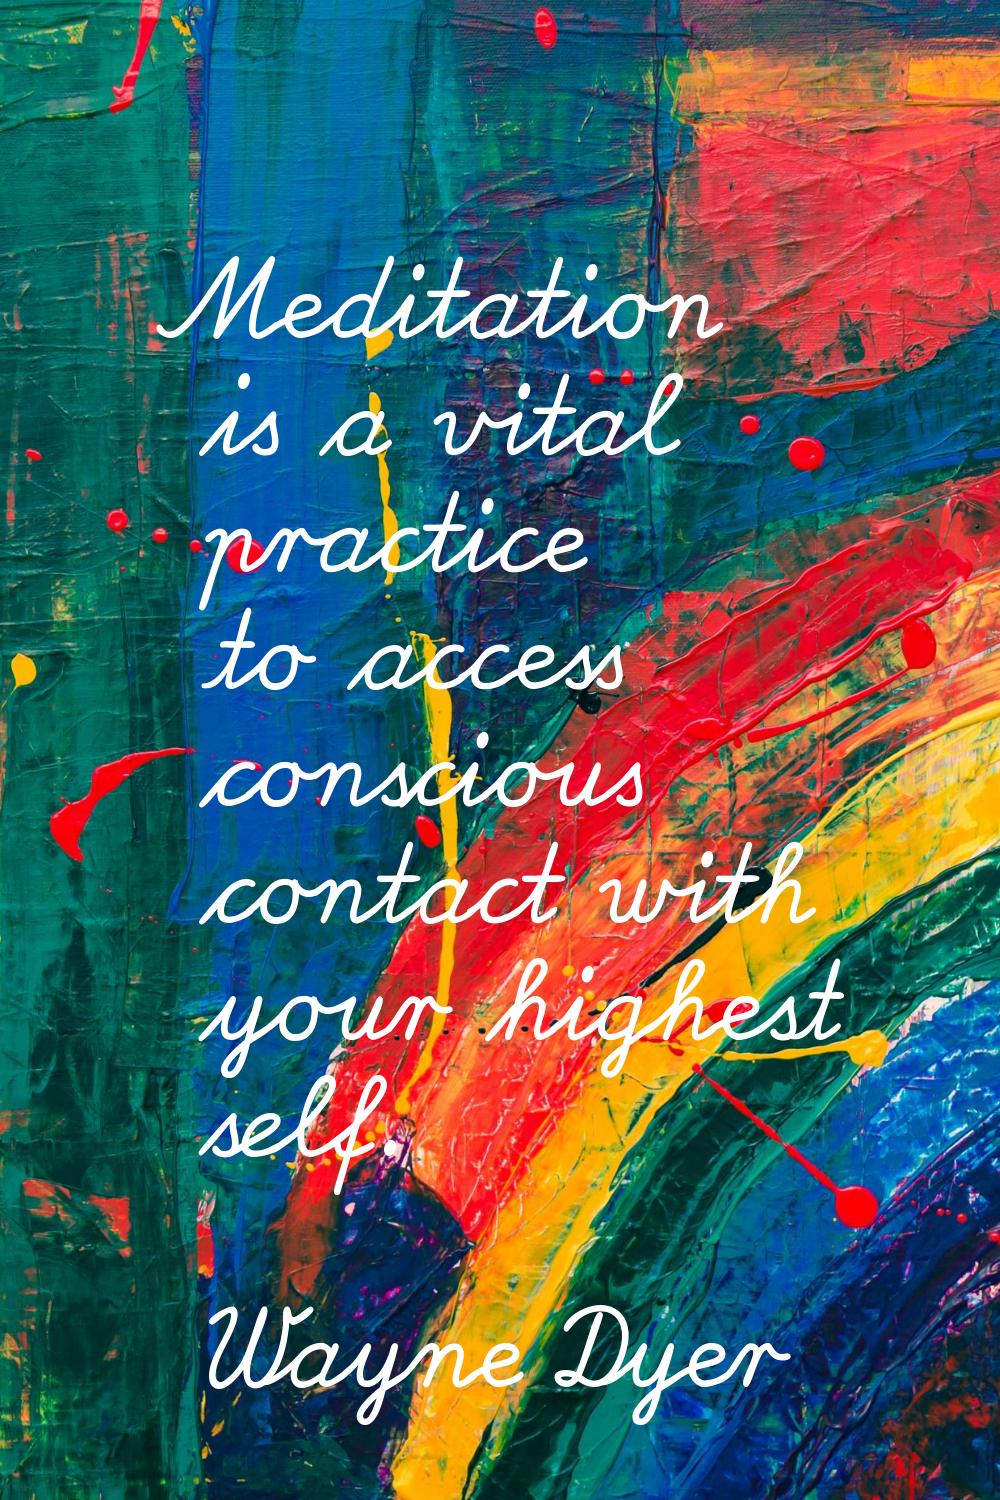 Meditation is a vital practice to access conscious contact with your highest self.